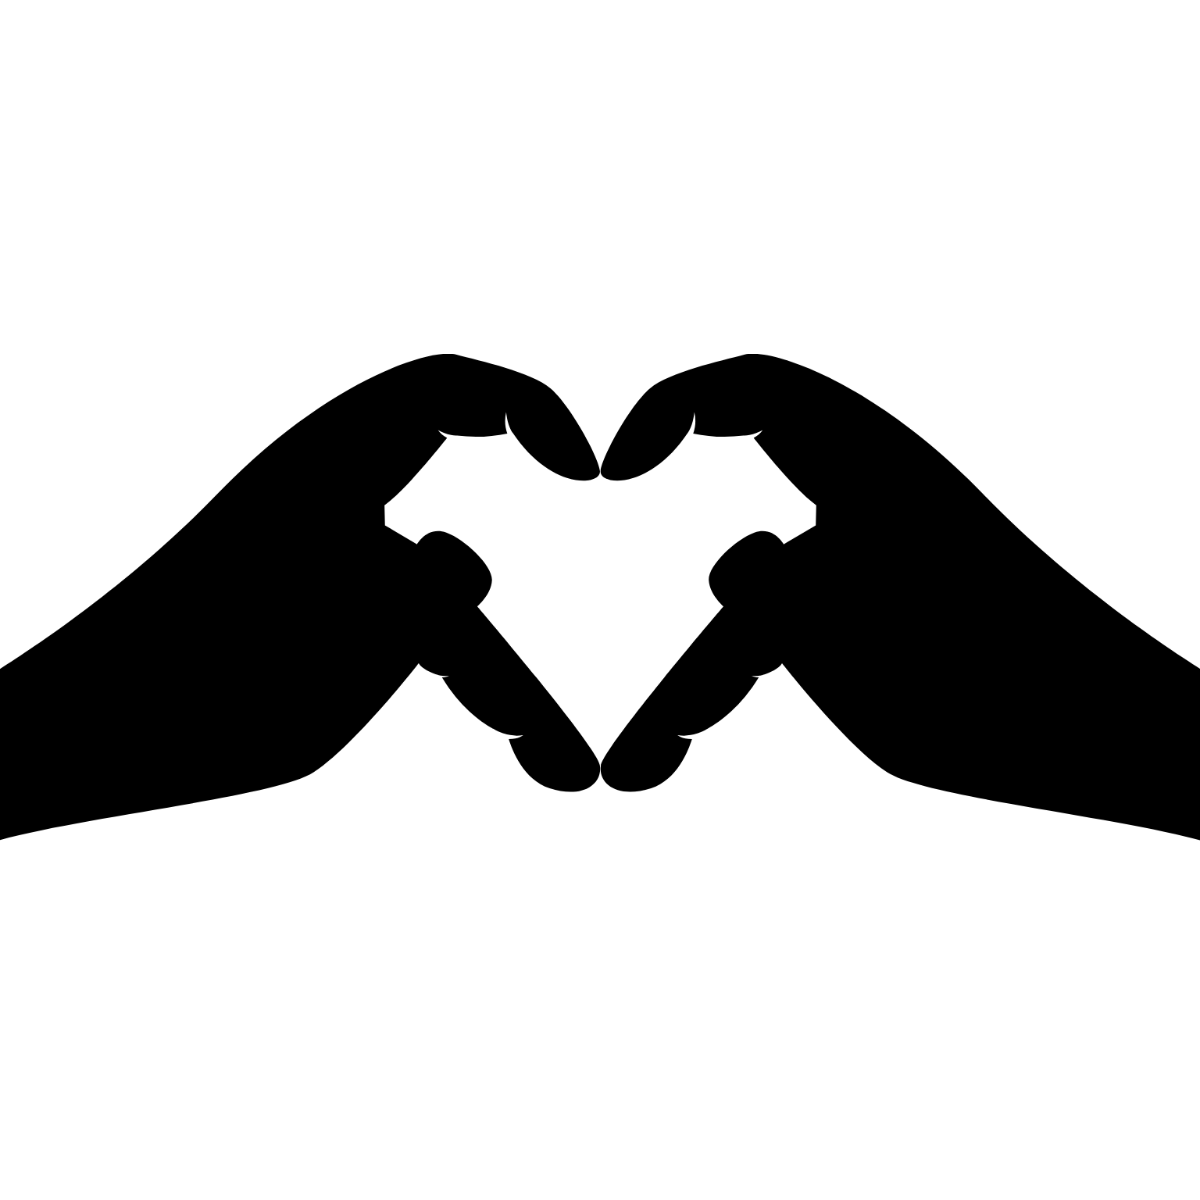 Hands Forming Heart Silhouette Template